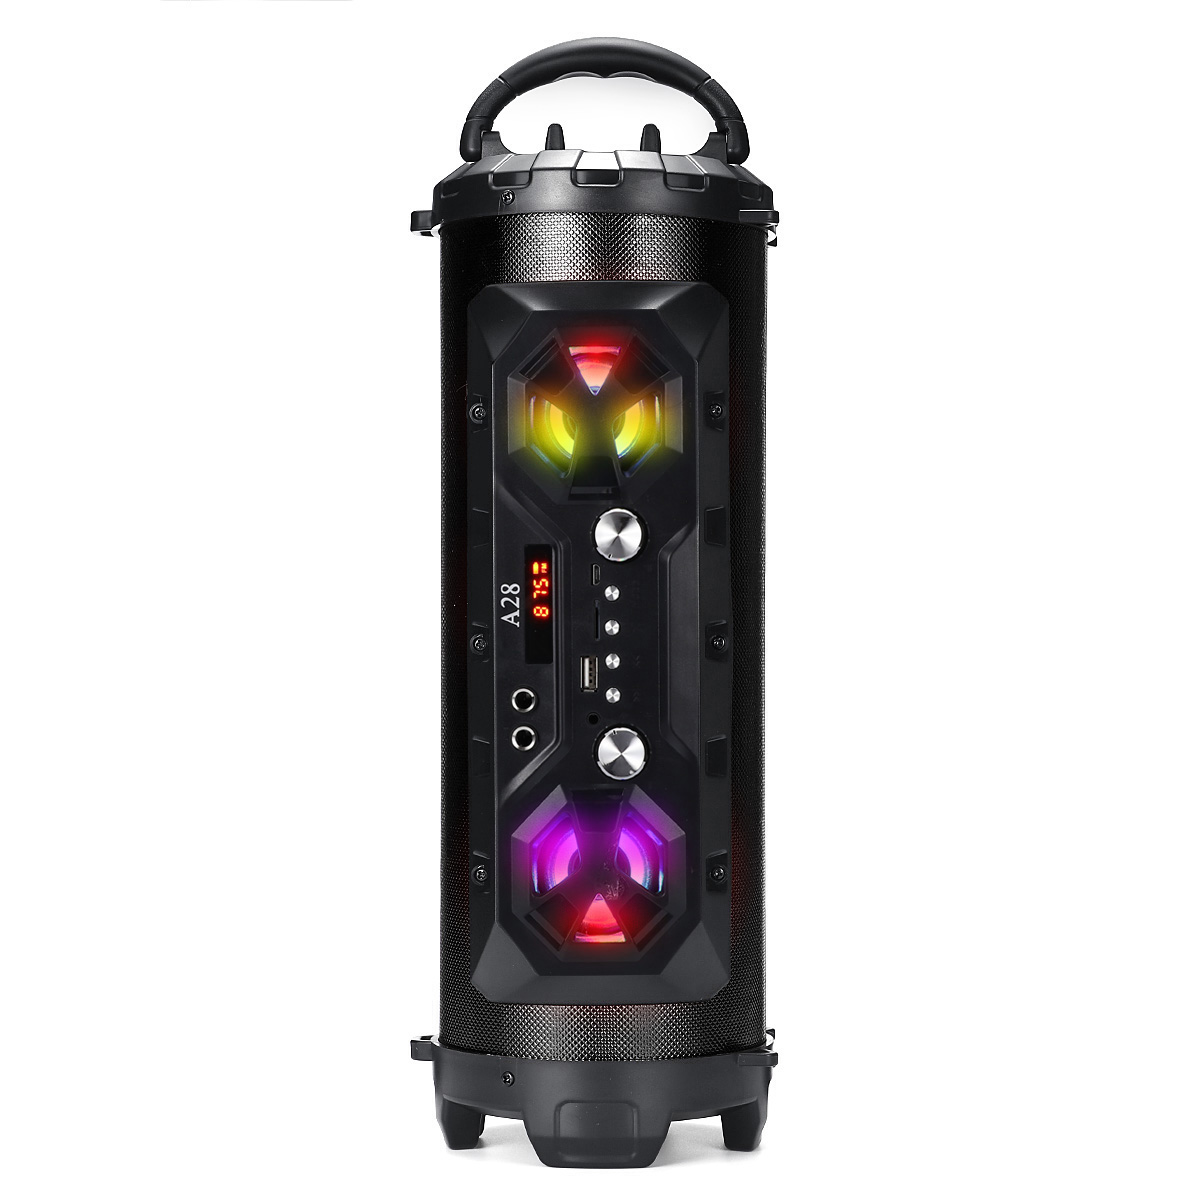 Unique Portable LED Wireless Portable bluetooth 4.2 Speaker Stereo Sound Super Bass HIFI AUX FM Subwoofer Loudspeaker ,RGB Colorful Lights, EQ, Booming Bass, Outdoor Speaker for Home, Party, Camping - image 4 of 9